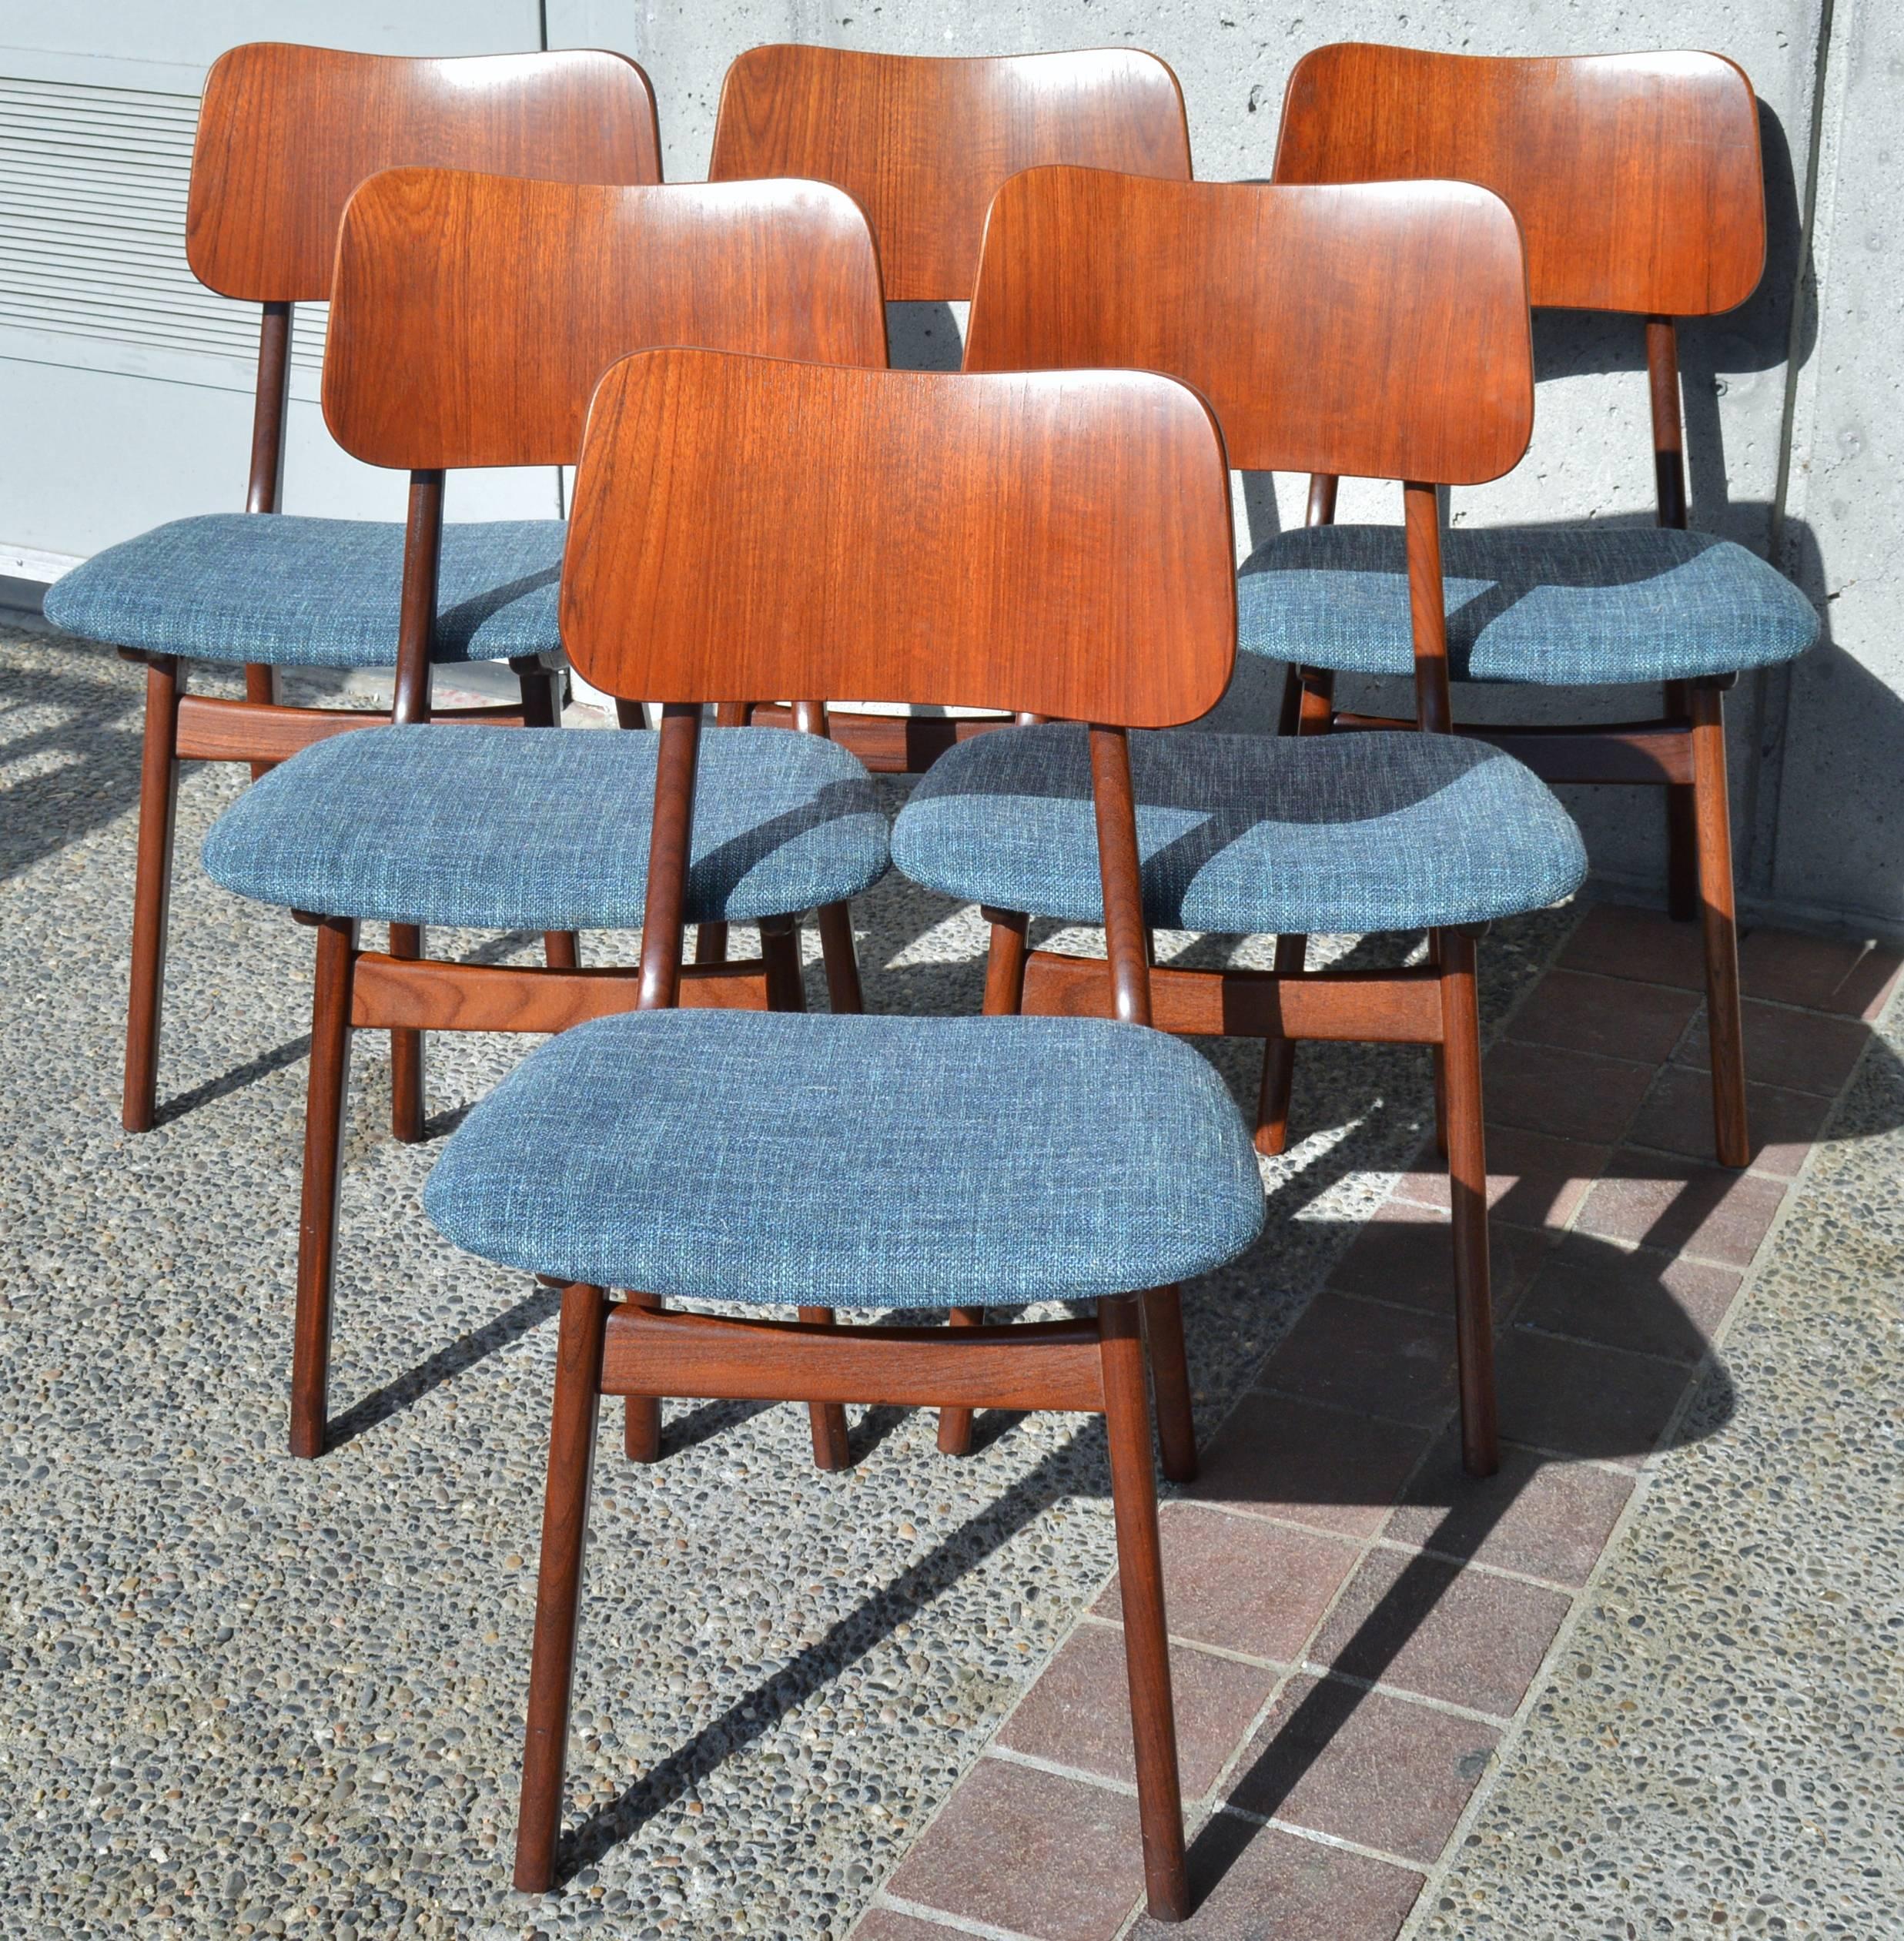 This lovely set of Danish modern teak shield-back dining chairs were designed by Arne Hovmand-Olsen and are the rare version with the all wood back (normally the front of the backrest is upholstered.) Note the floating backrest that is spaced by